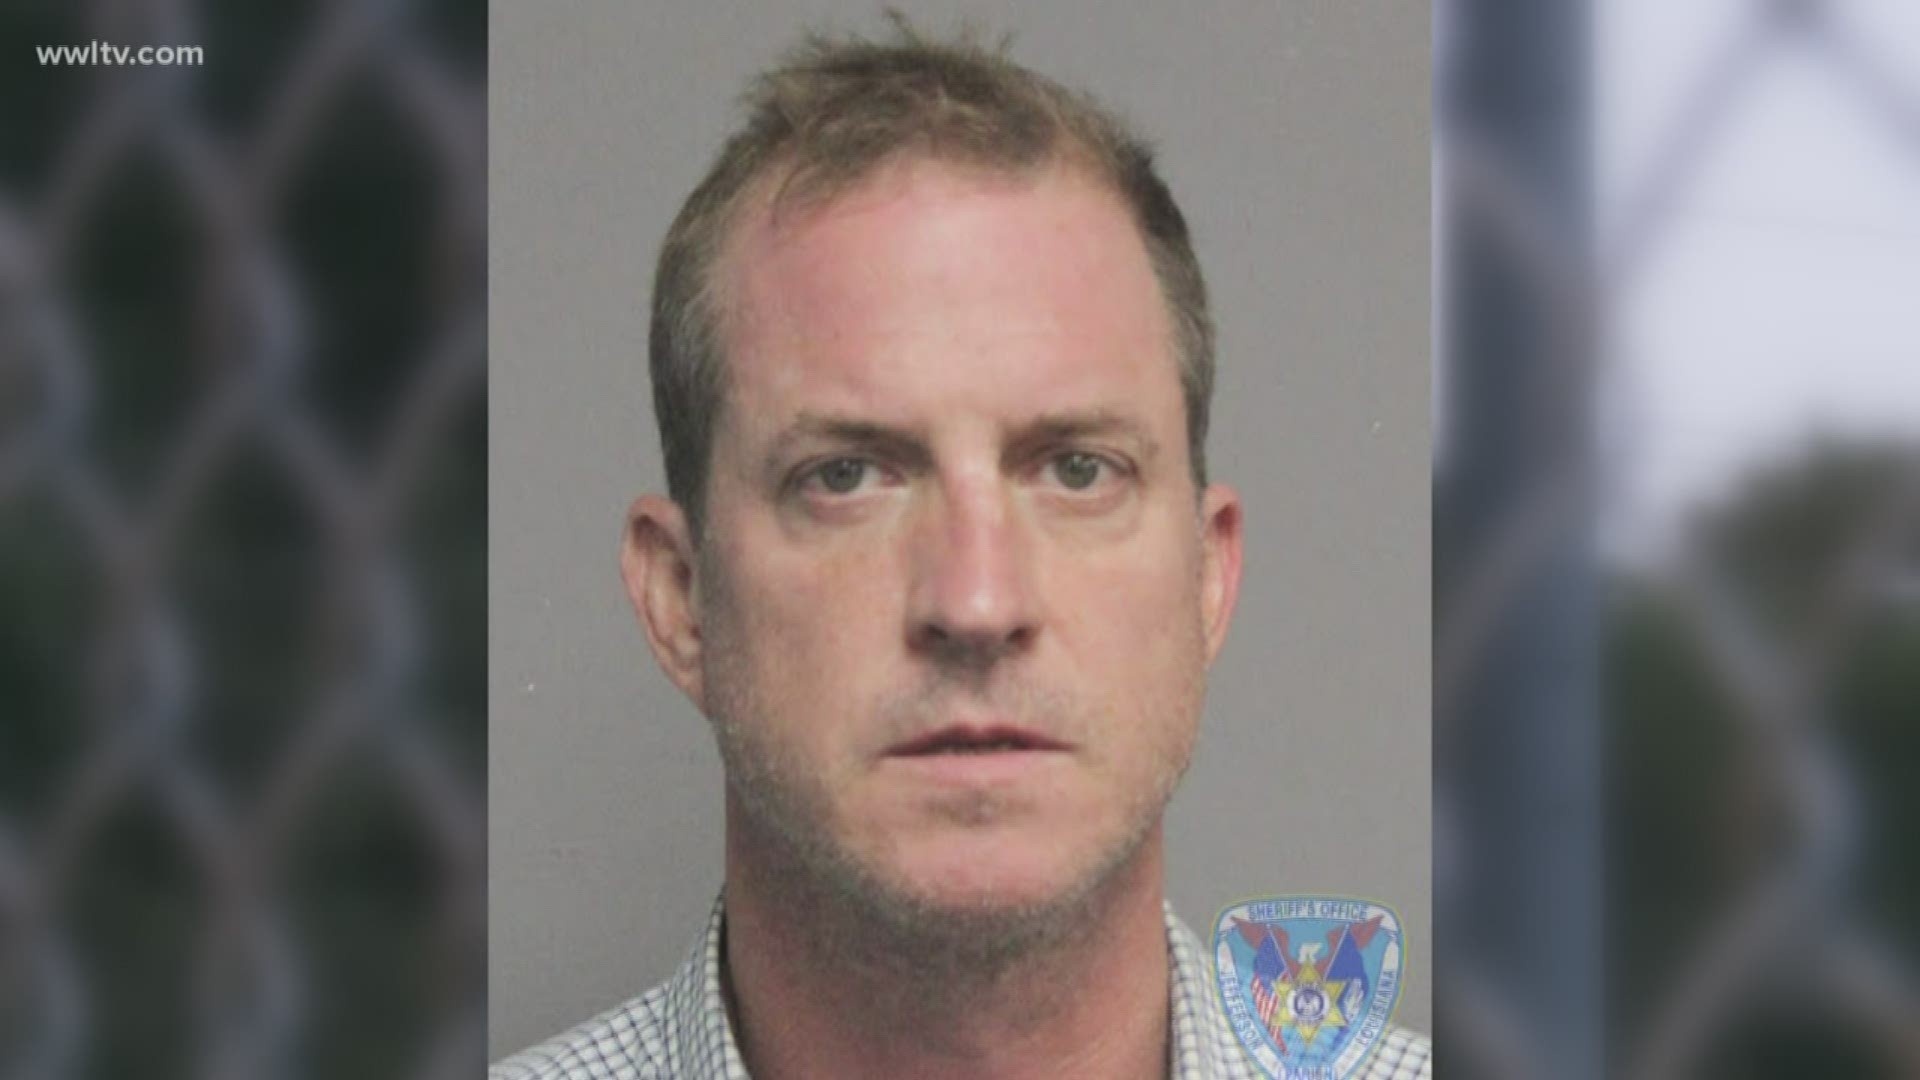 A volunteer baseball coach at Lakeshore Playground abused his position to molest children, according to the Jefferson Parish Sheriff’s Office.